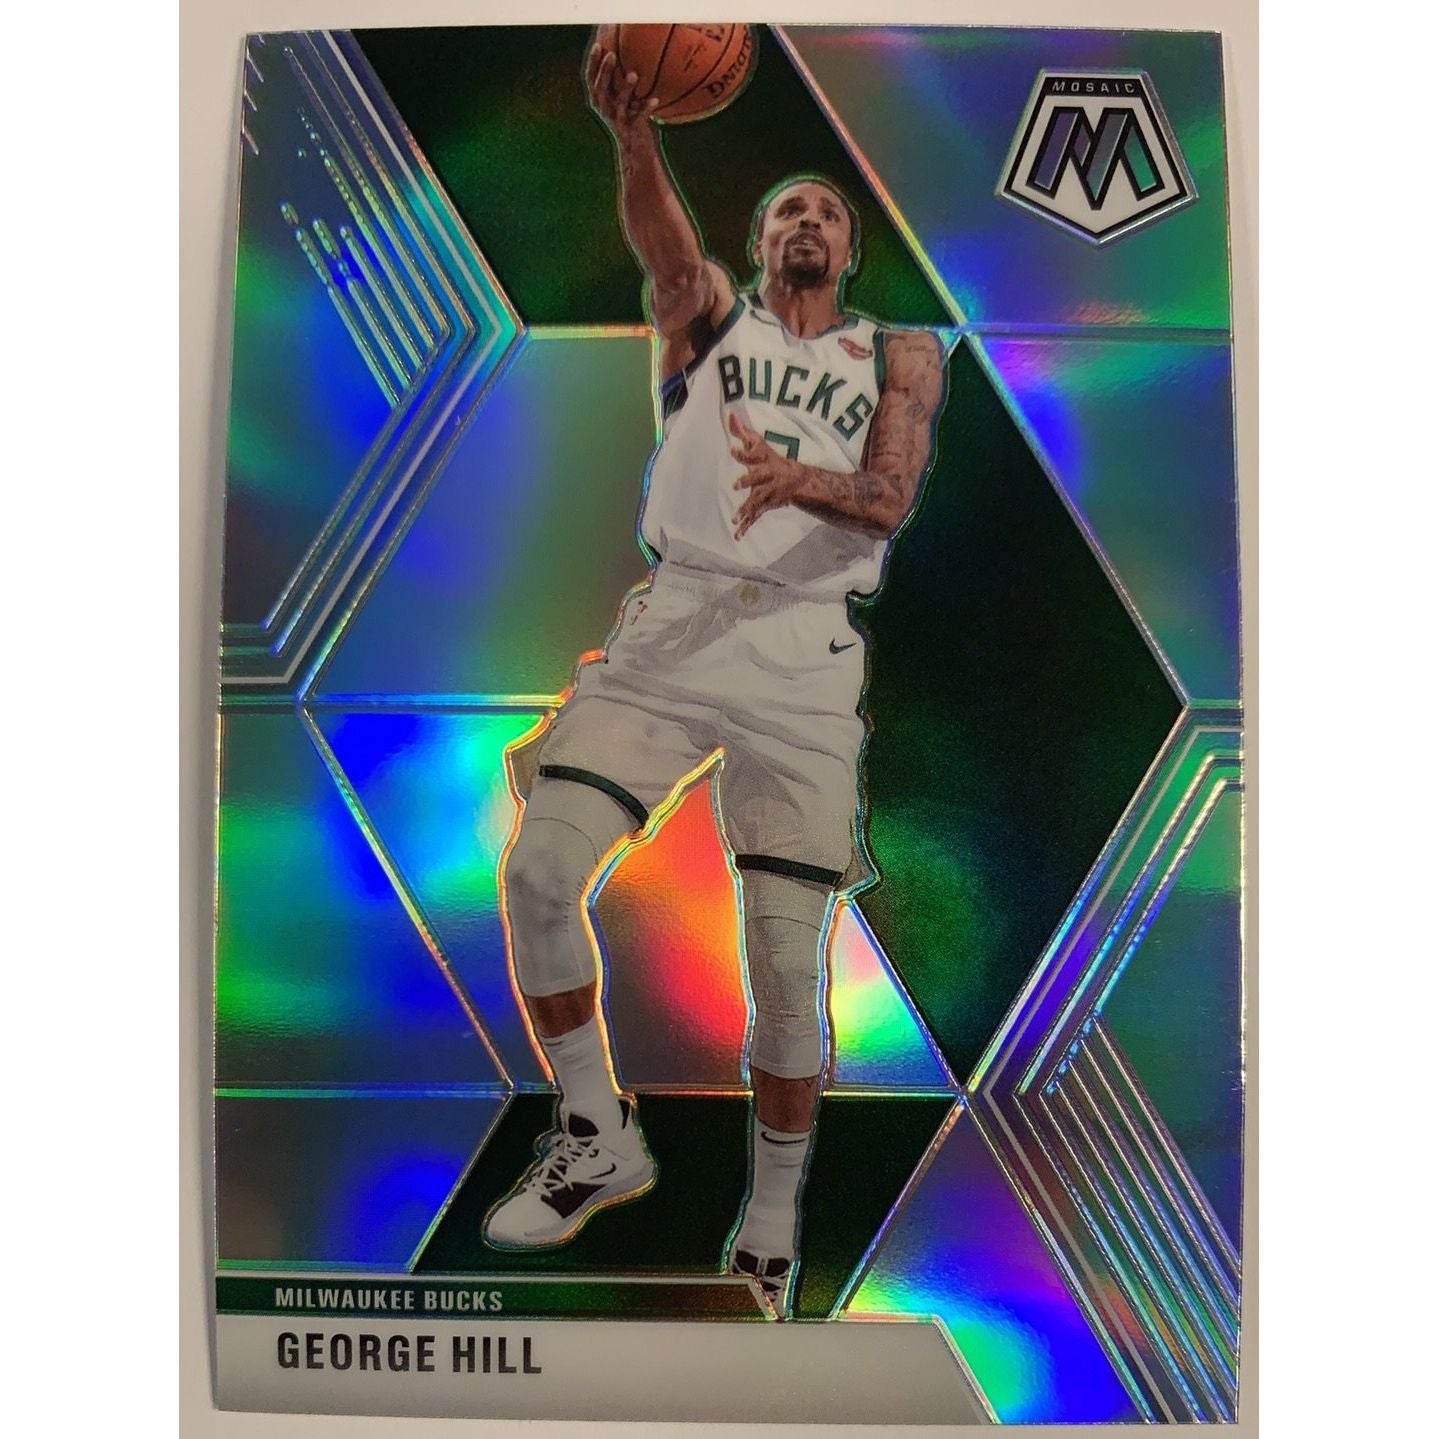  2019-20 Mosaic George Hill Prizm  Local Legends Cards & Collectibles